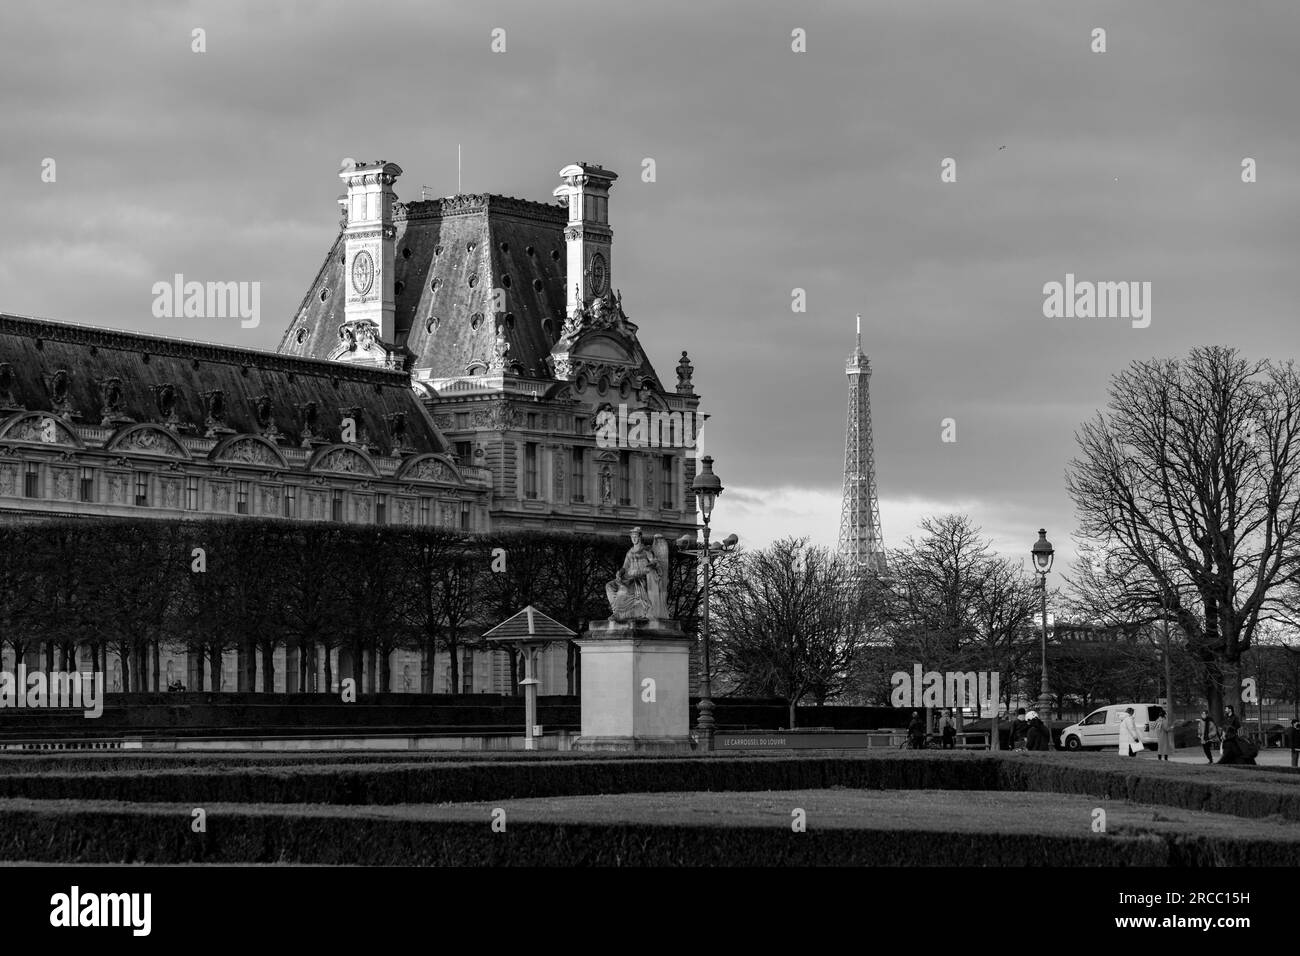 Paris, France - JAN 20, 2022: The iconic Eiffel Tower in a sunny winter day, wrought-iron lattice tower on the Champ de Mars in Paris, France. Stock Photo